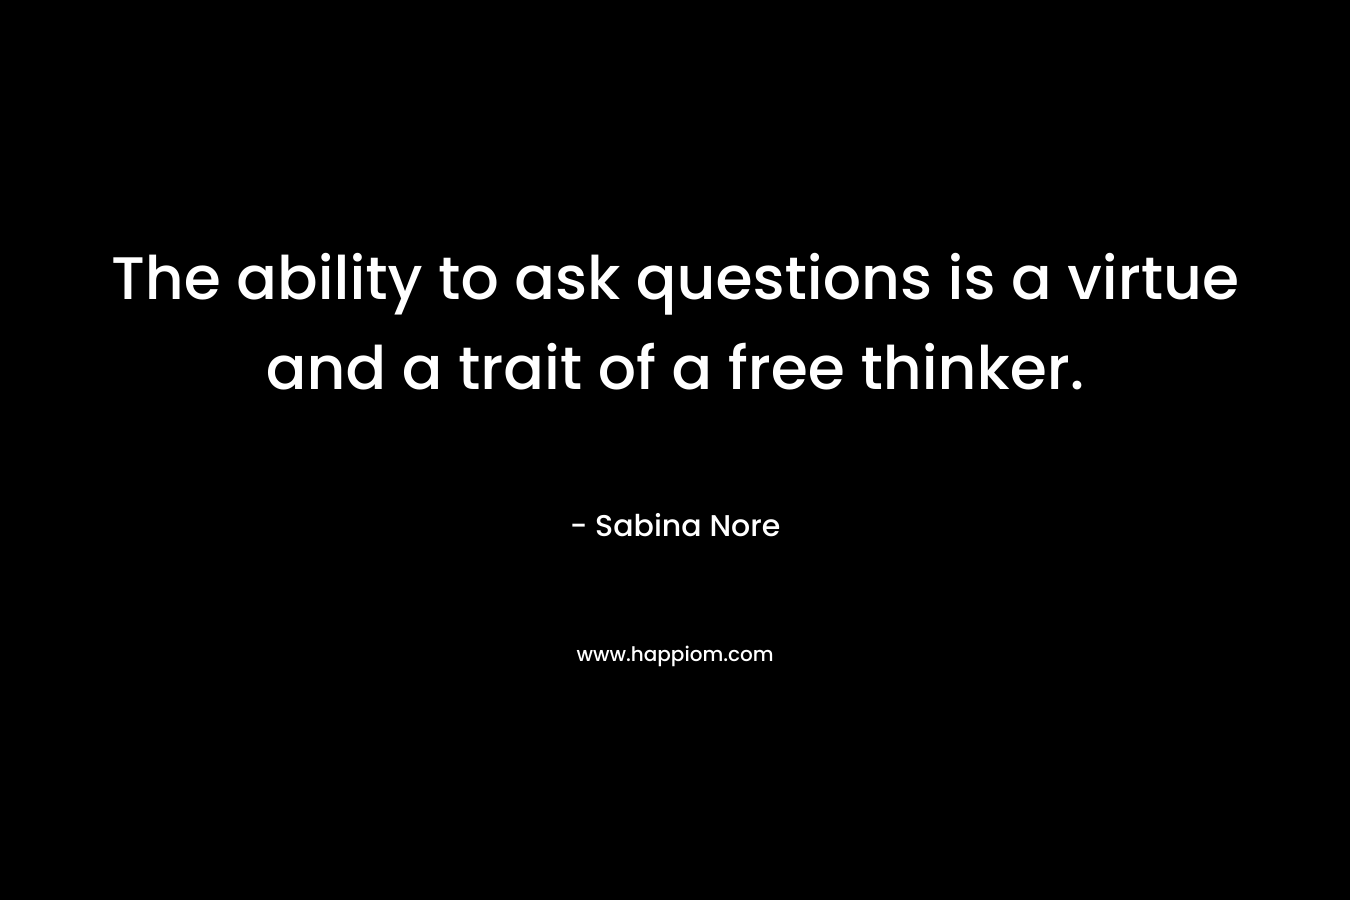 The ability to ask questions is a virtue and a trait of a free thinker. – Sabina Nore